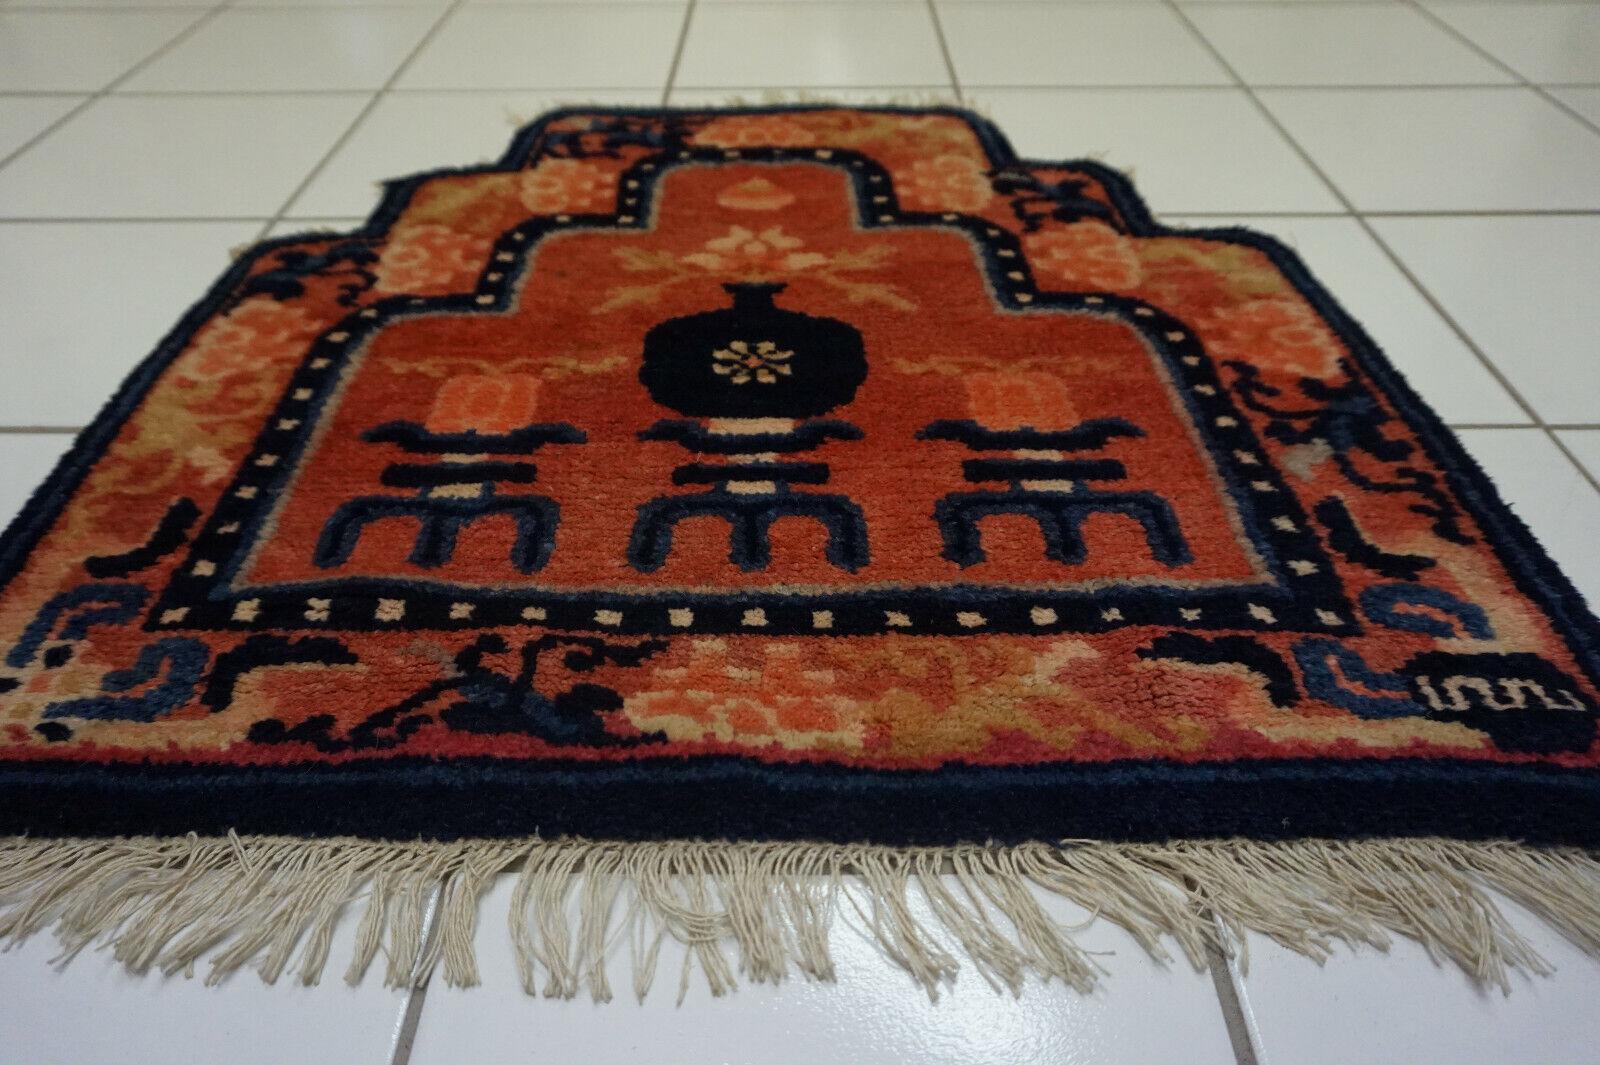 Handmade Antique Chinese Ningsha Collectible Rug 1.8' x 1.8', 1900s - 1D42 For Sale 2